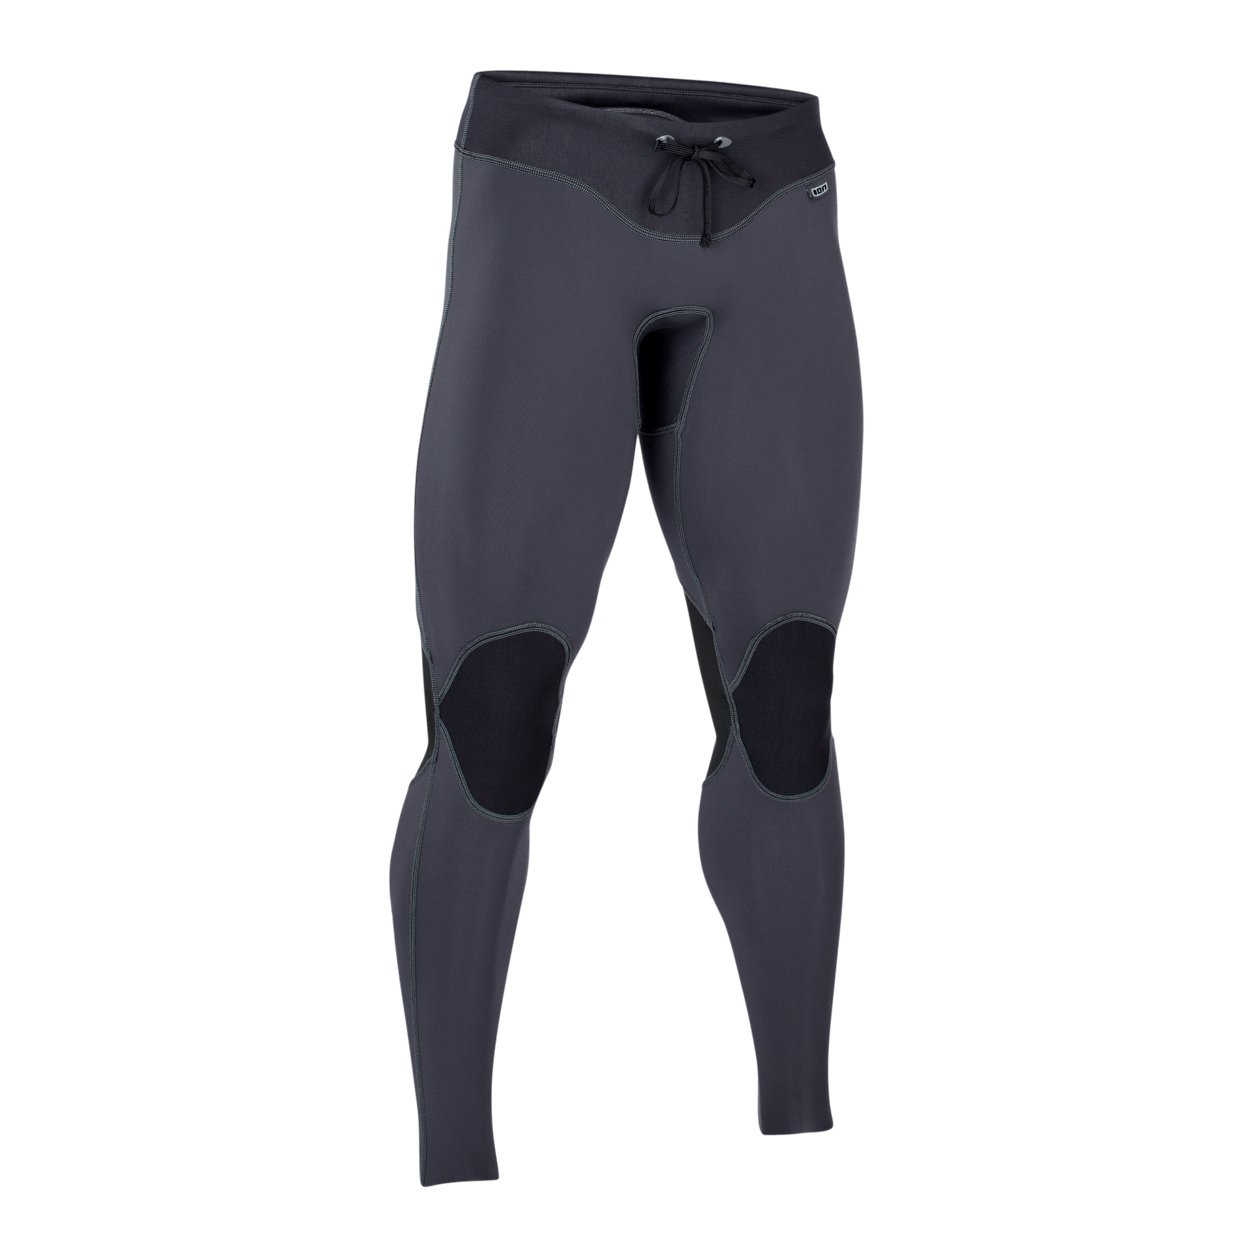 ION Neo Pants 2.0 Men 2022 - Worthing Watersports - 9008415681761 - Tops - ION Water